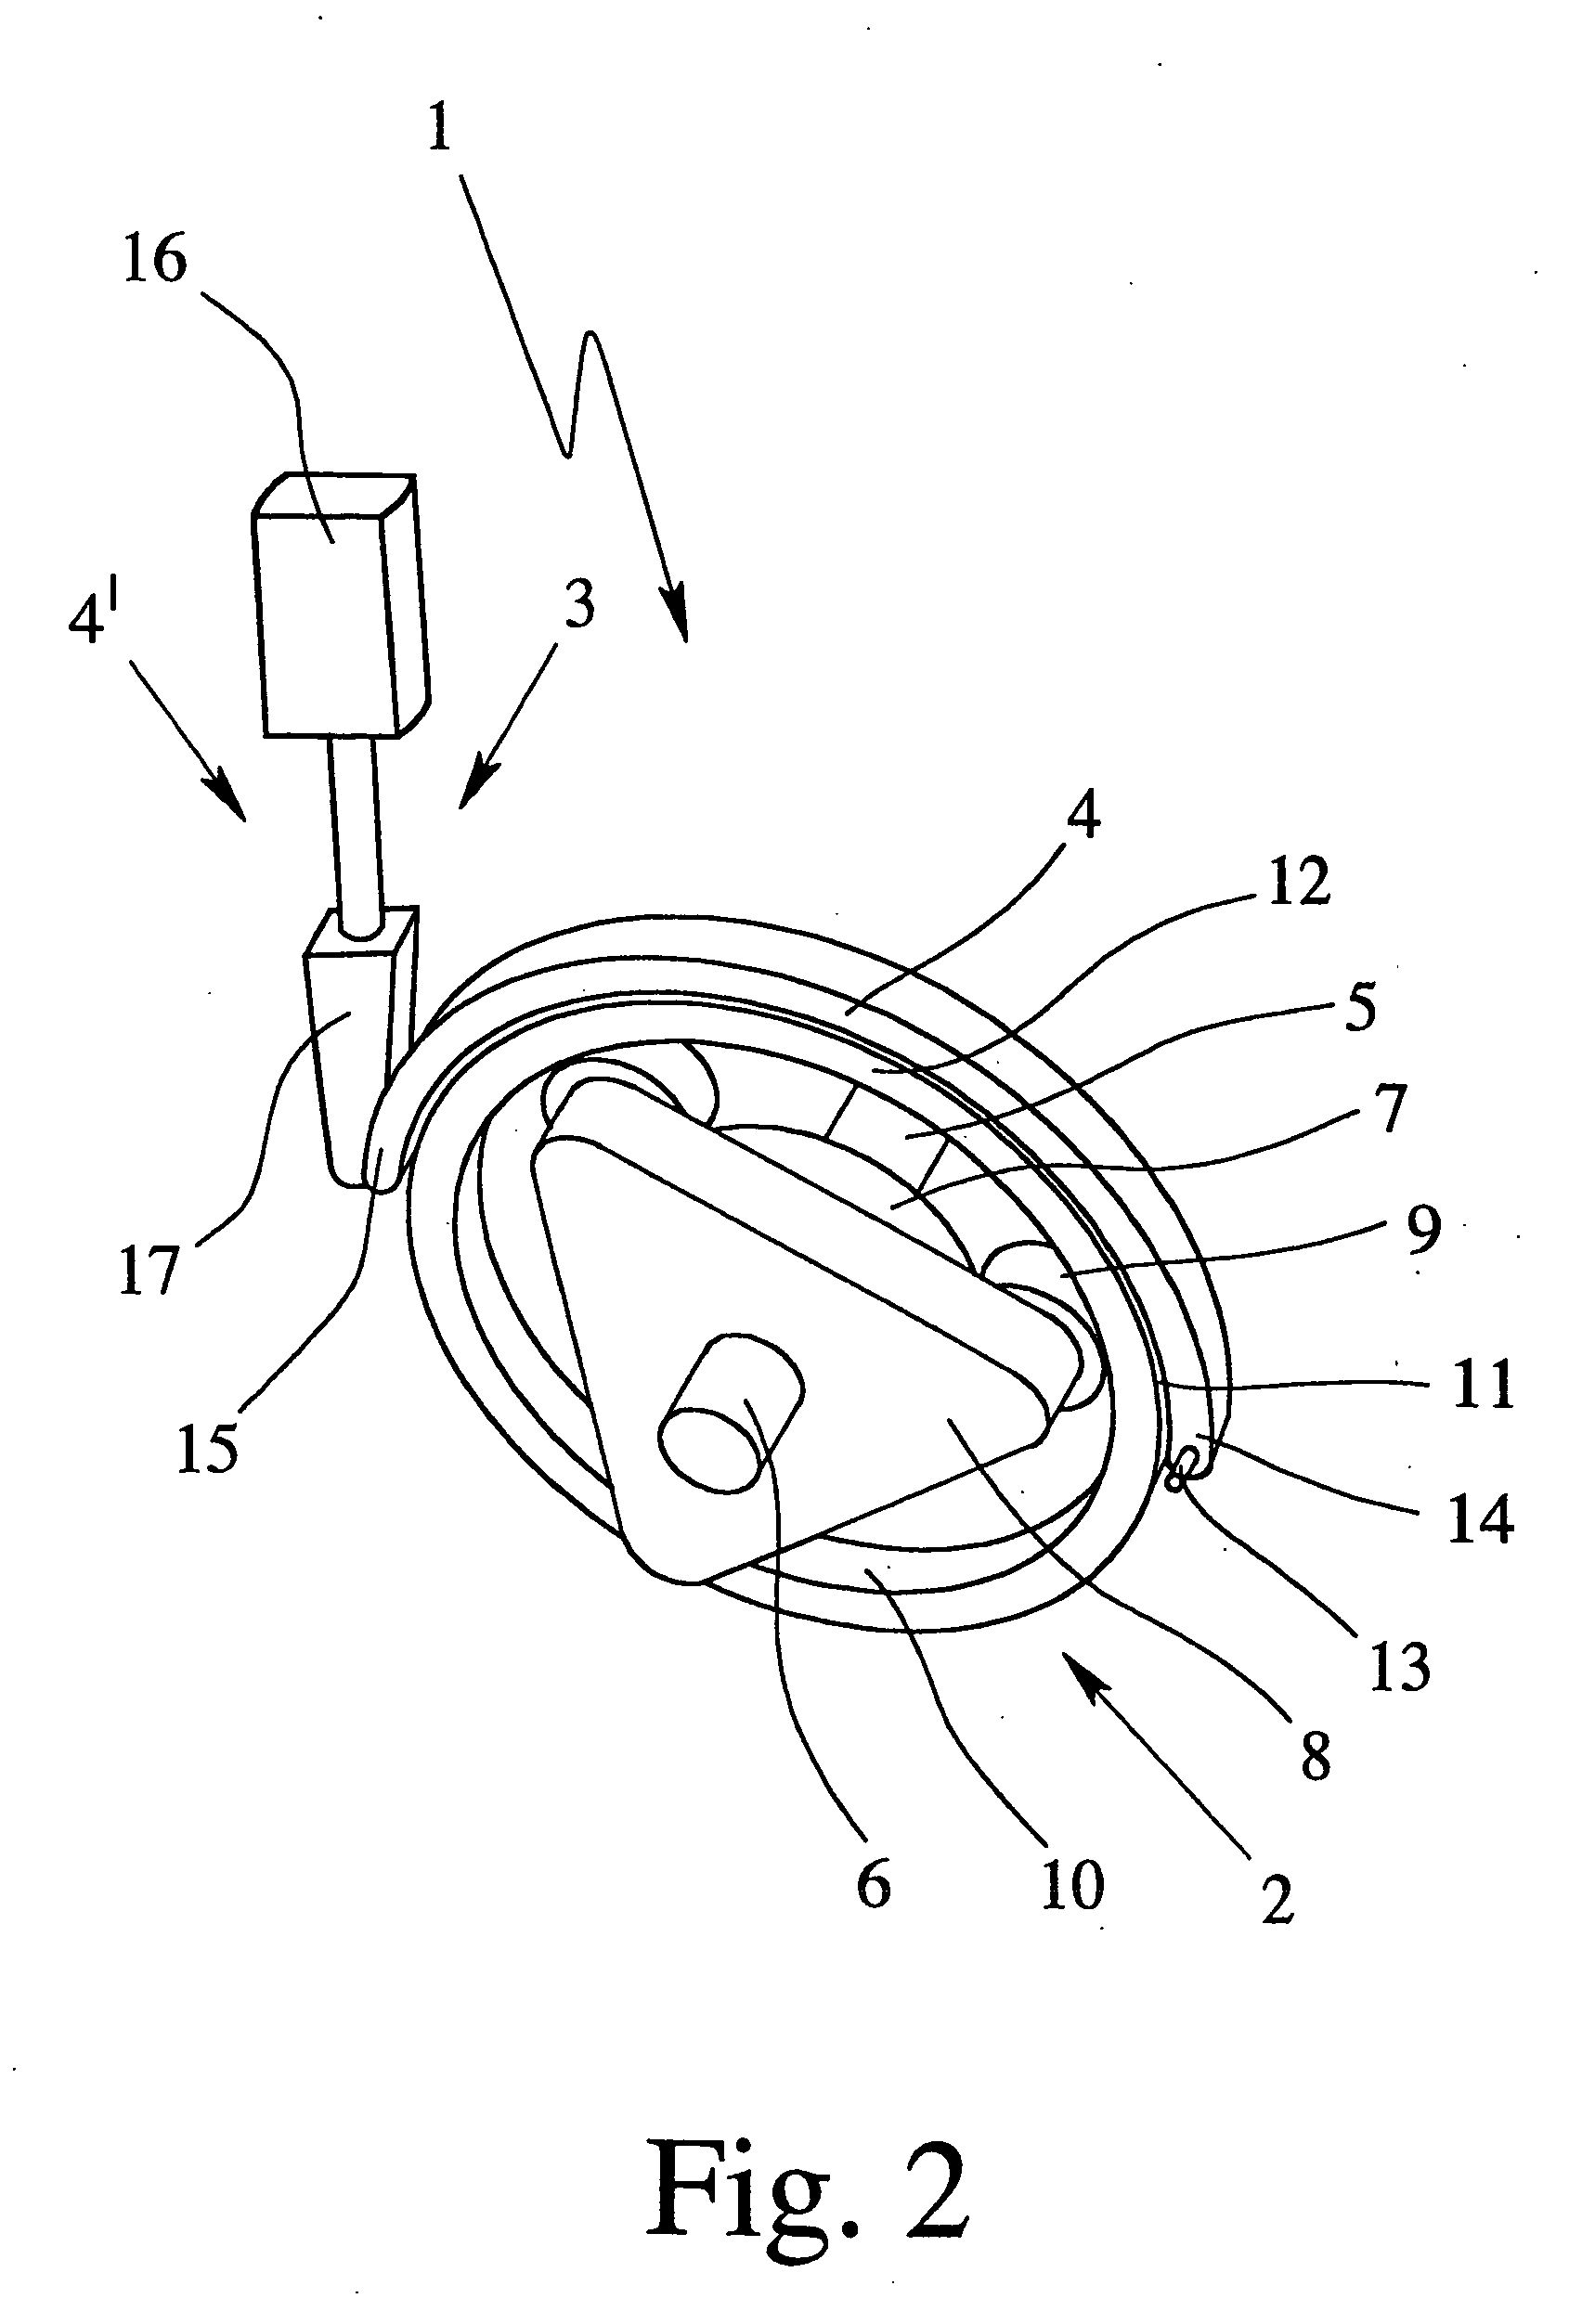 Drive arrangement for a motor vehicle door or hatch which can be moved by a motor